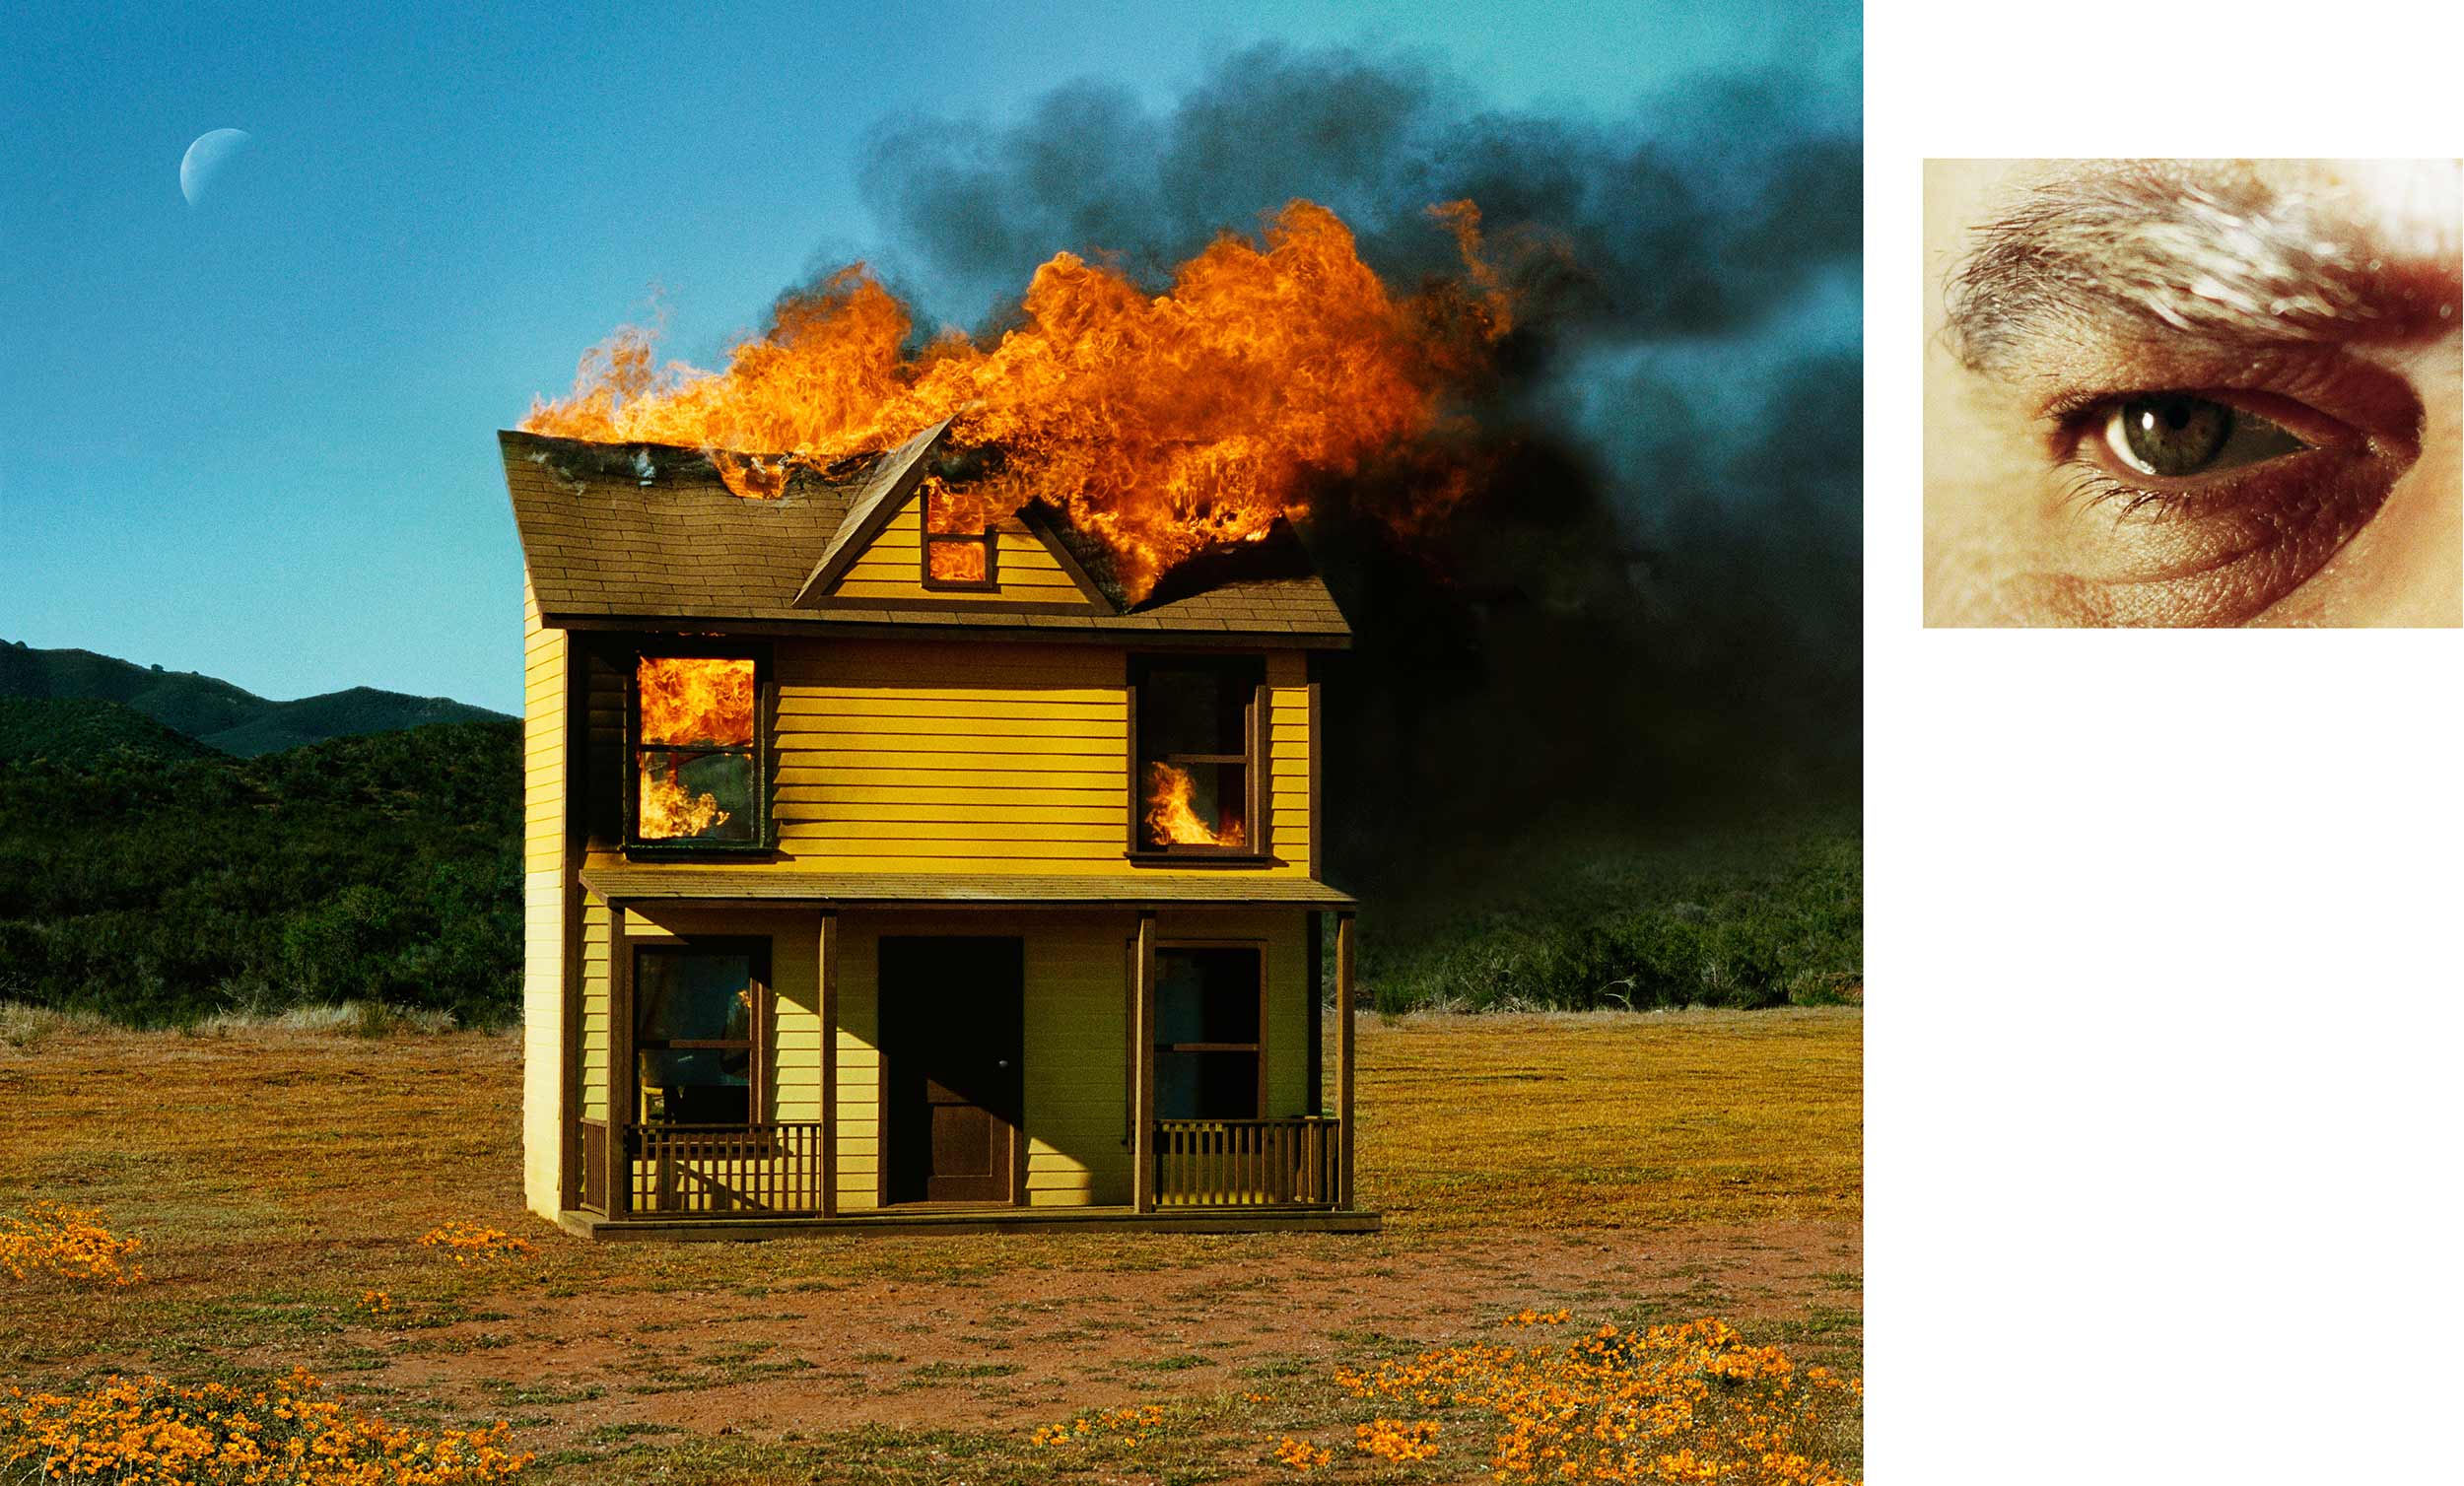   Compulsion   4:01 PM, Sun Valley And Eye #3 (House Fire) (Diptych),  2012 Scene: 59 x 74.8, Eye: 20 x 23 inches 